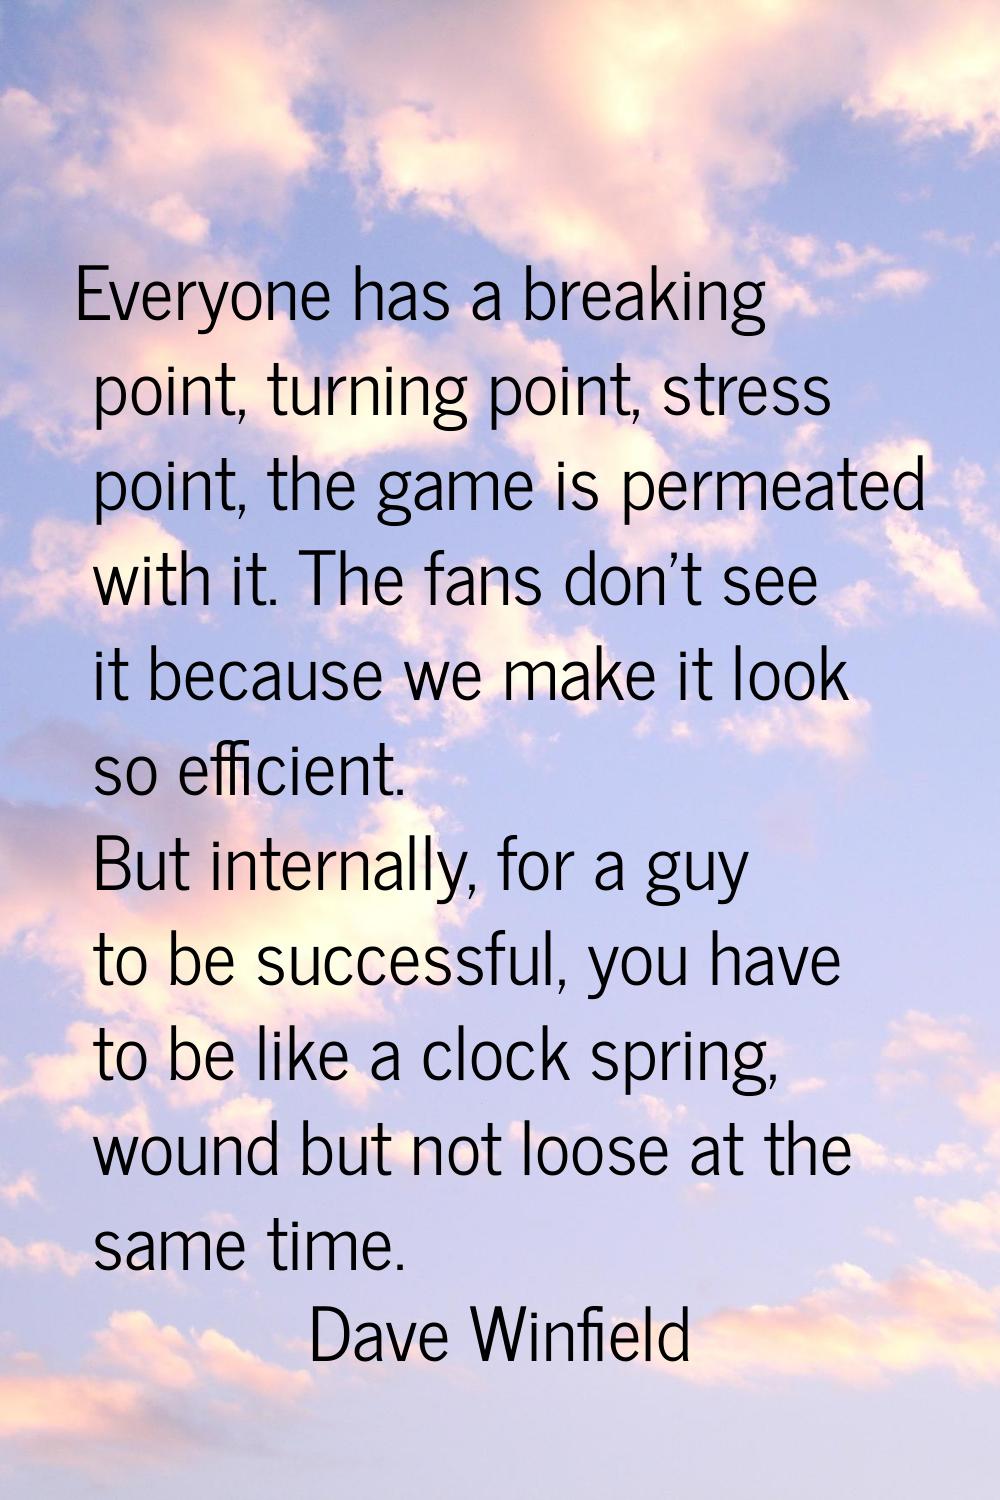 Everyone has a breaking point, turning point, stress point, the game is permeated with it. The fans